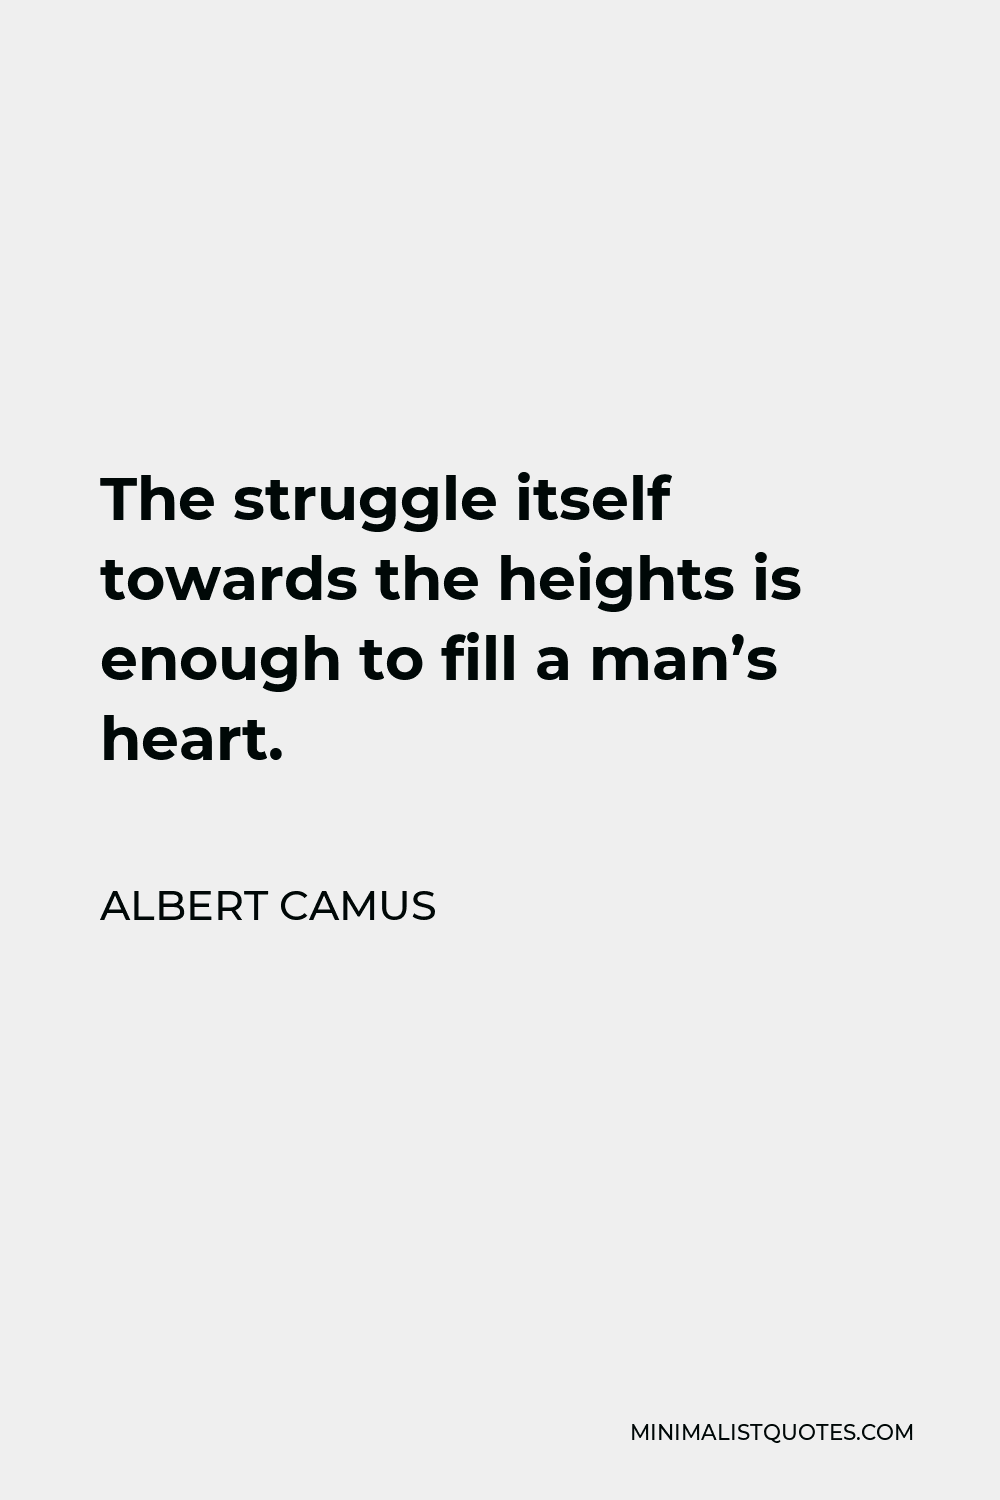 Albert Camus Quote - The struggle itself towards the heights is enough to fill a man’s heart.